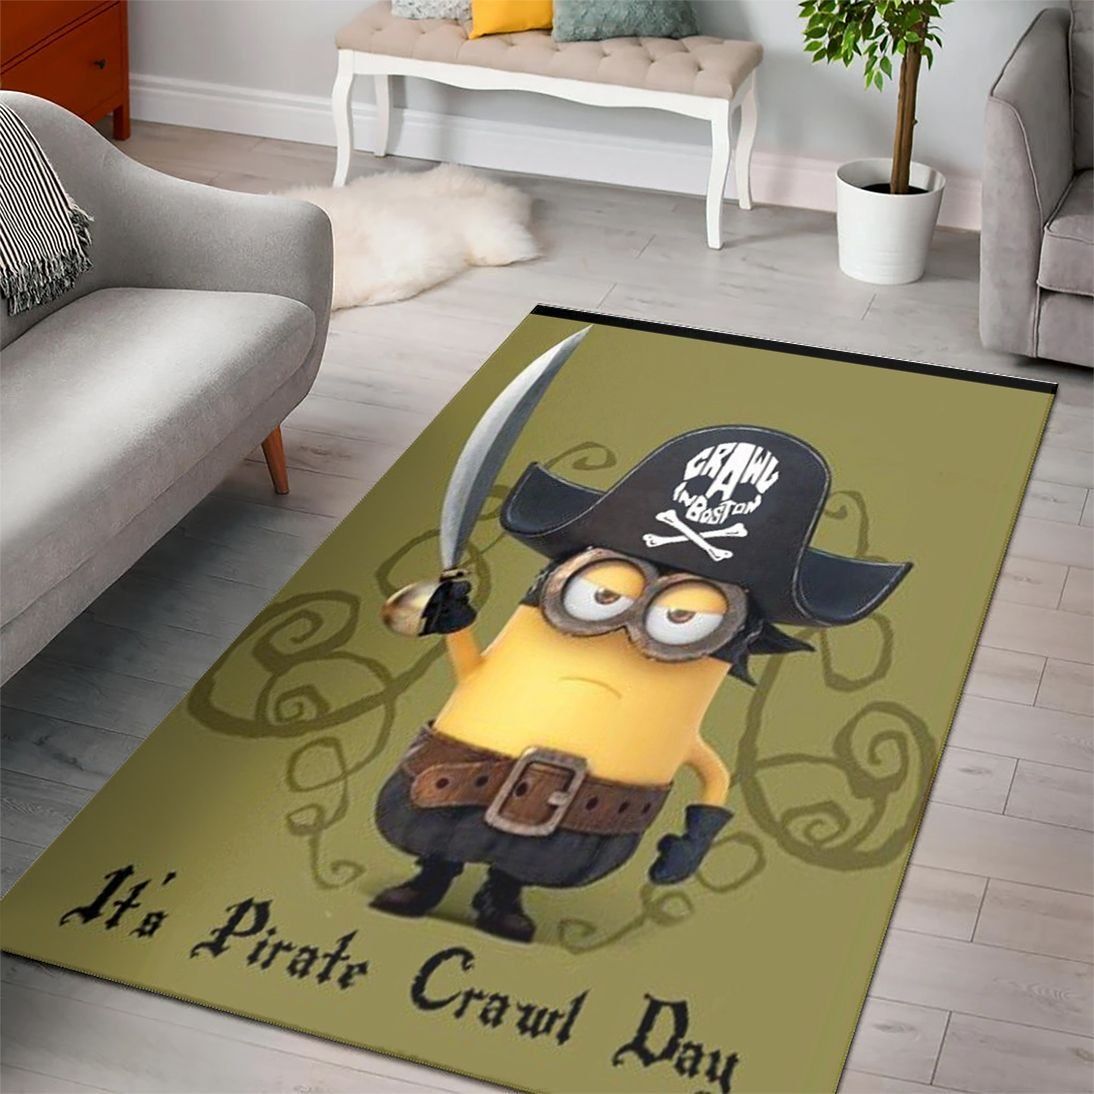 MINIONS DESPICABLE MINIONS CARTOON MOVIES AREA RUGS LIVING ROOM – CUSTOM SIZE AND PRINTING